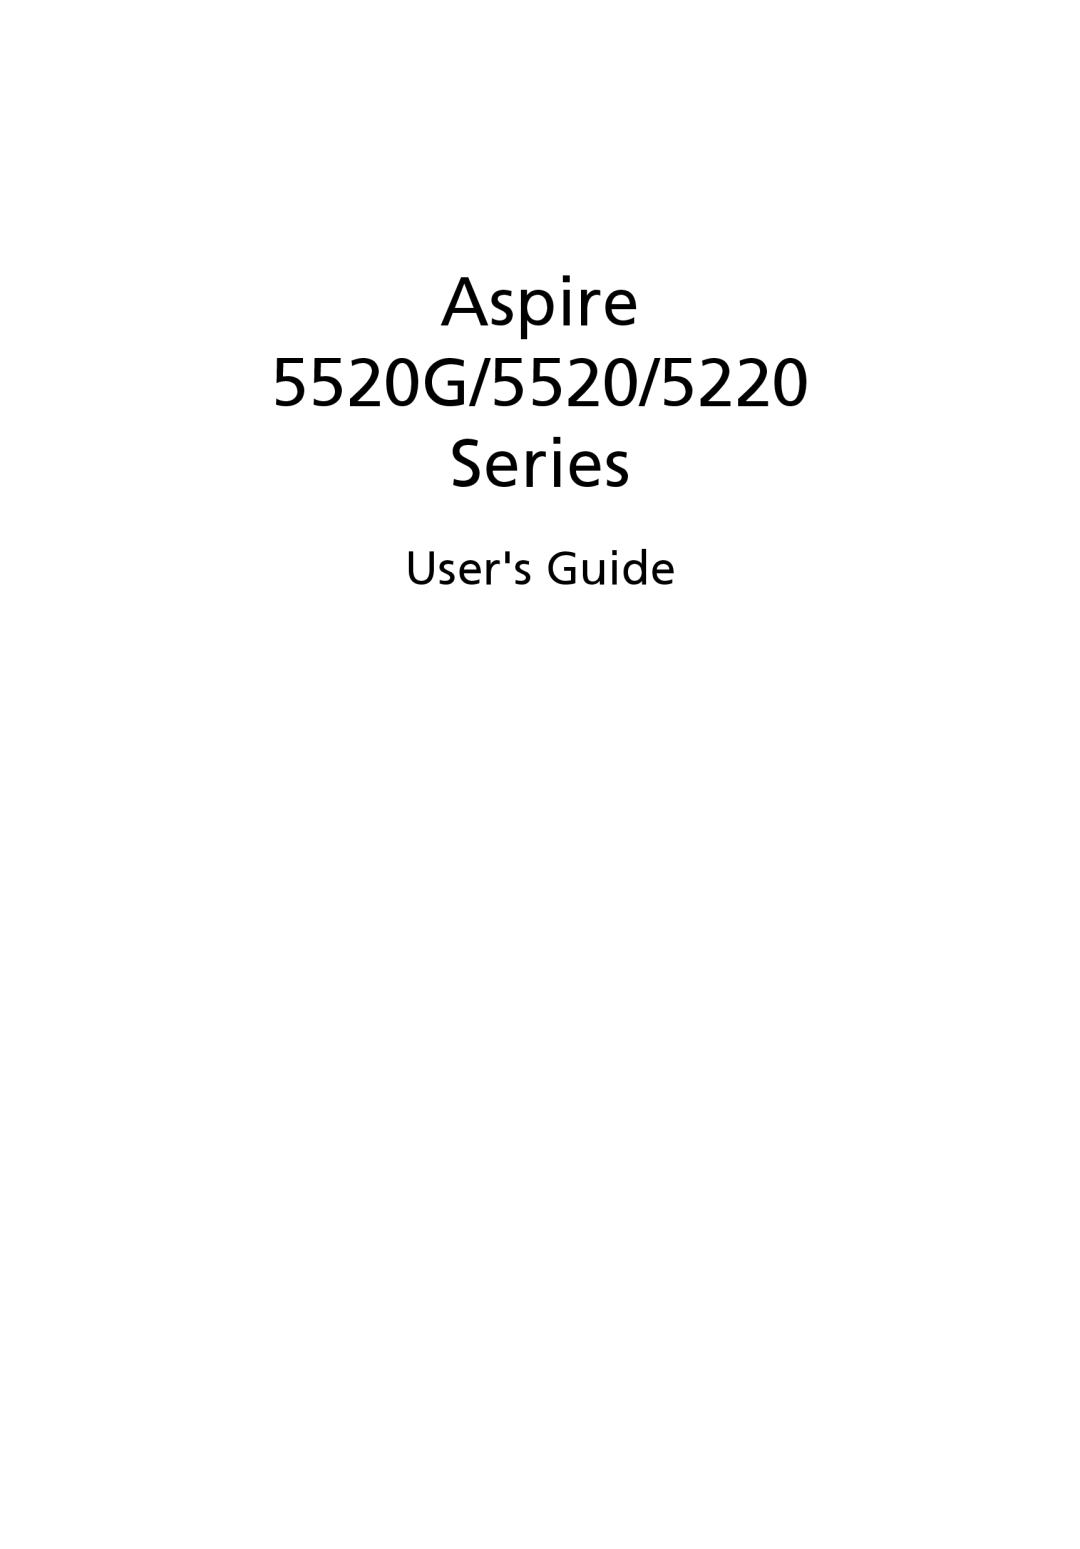 Acer manual Users Guide, Aspire 5520G/5520/5220 Series 